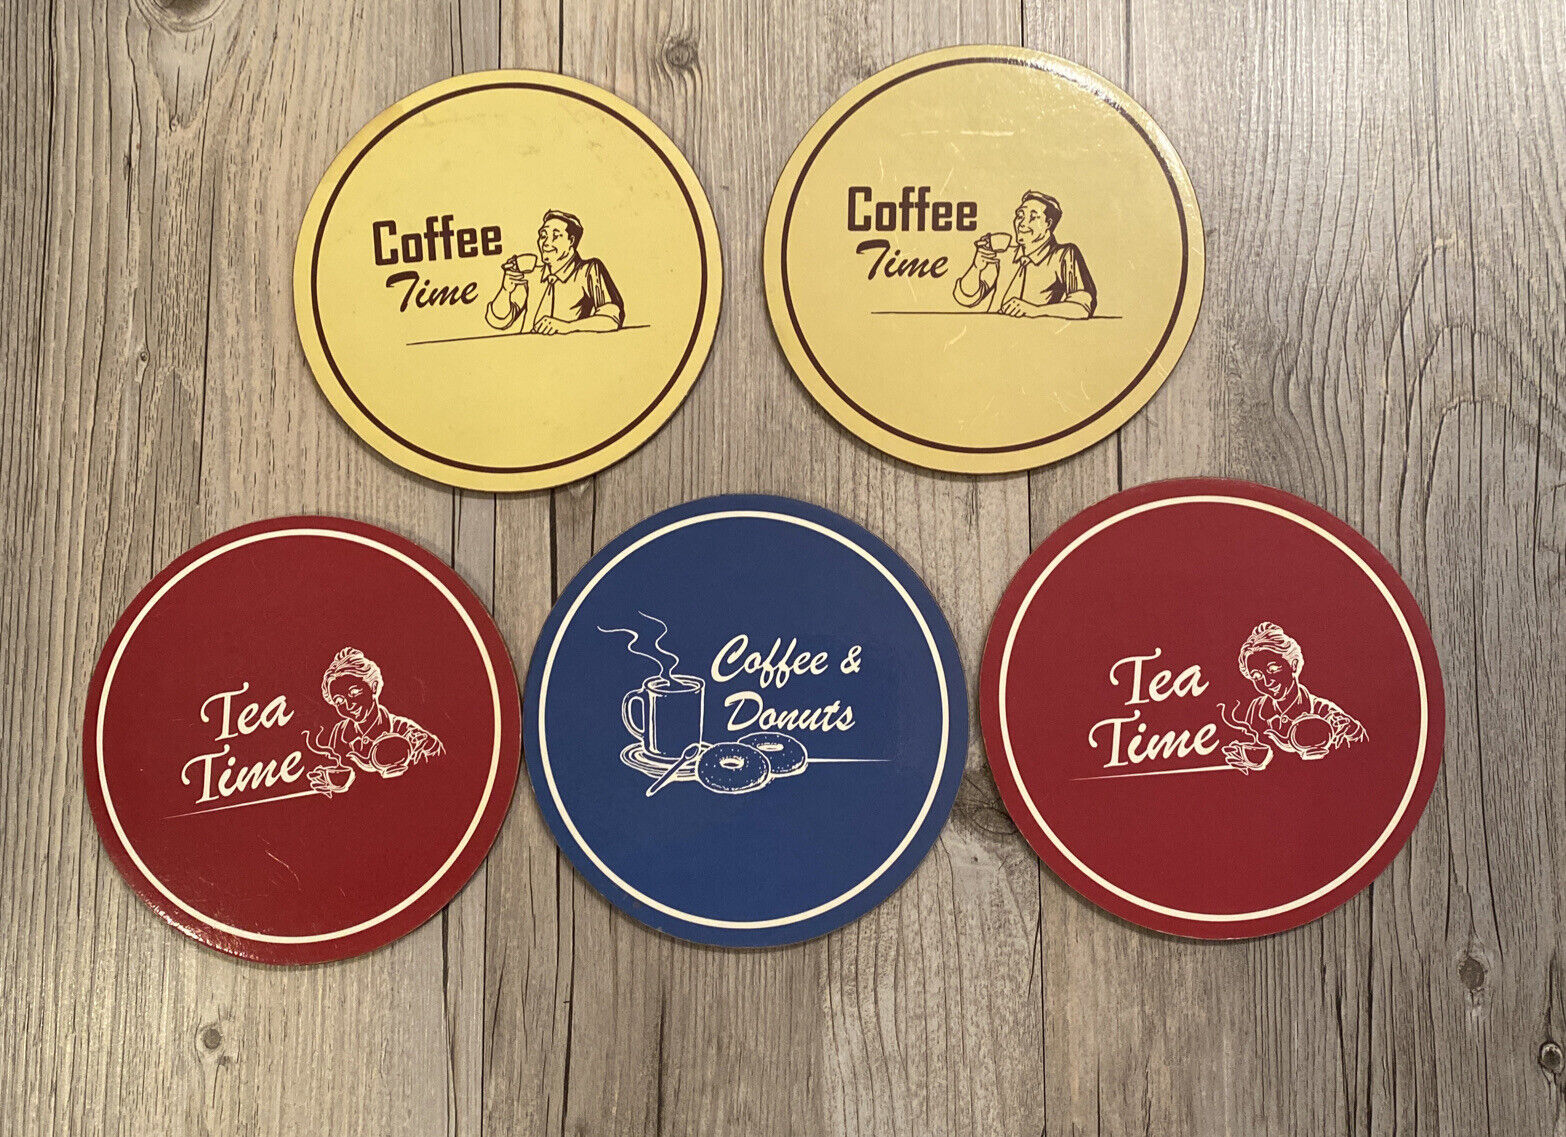 Coffee Tea Time Coffee & Donuts Cork Back Coasters 1950\'s Diner Style 5 Coasters